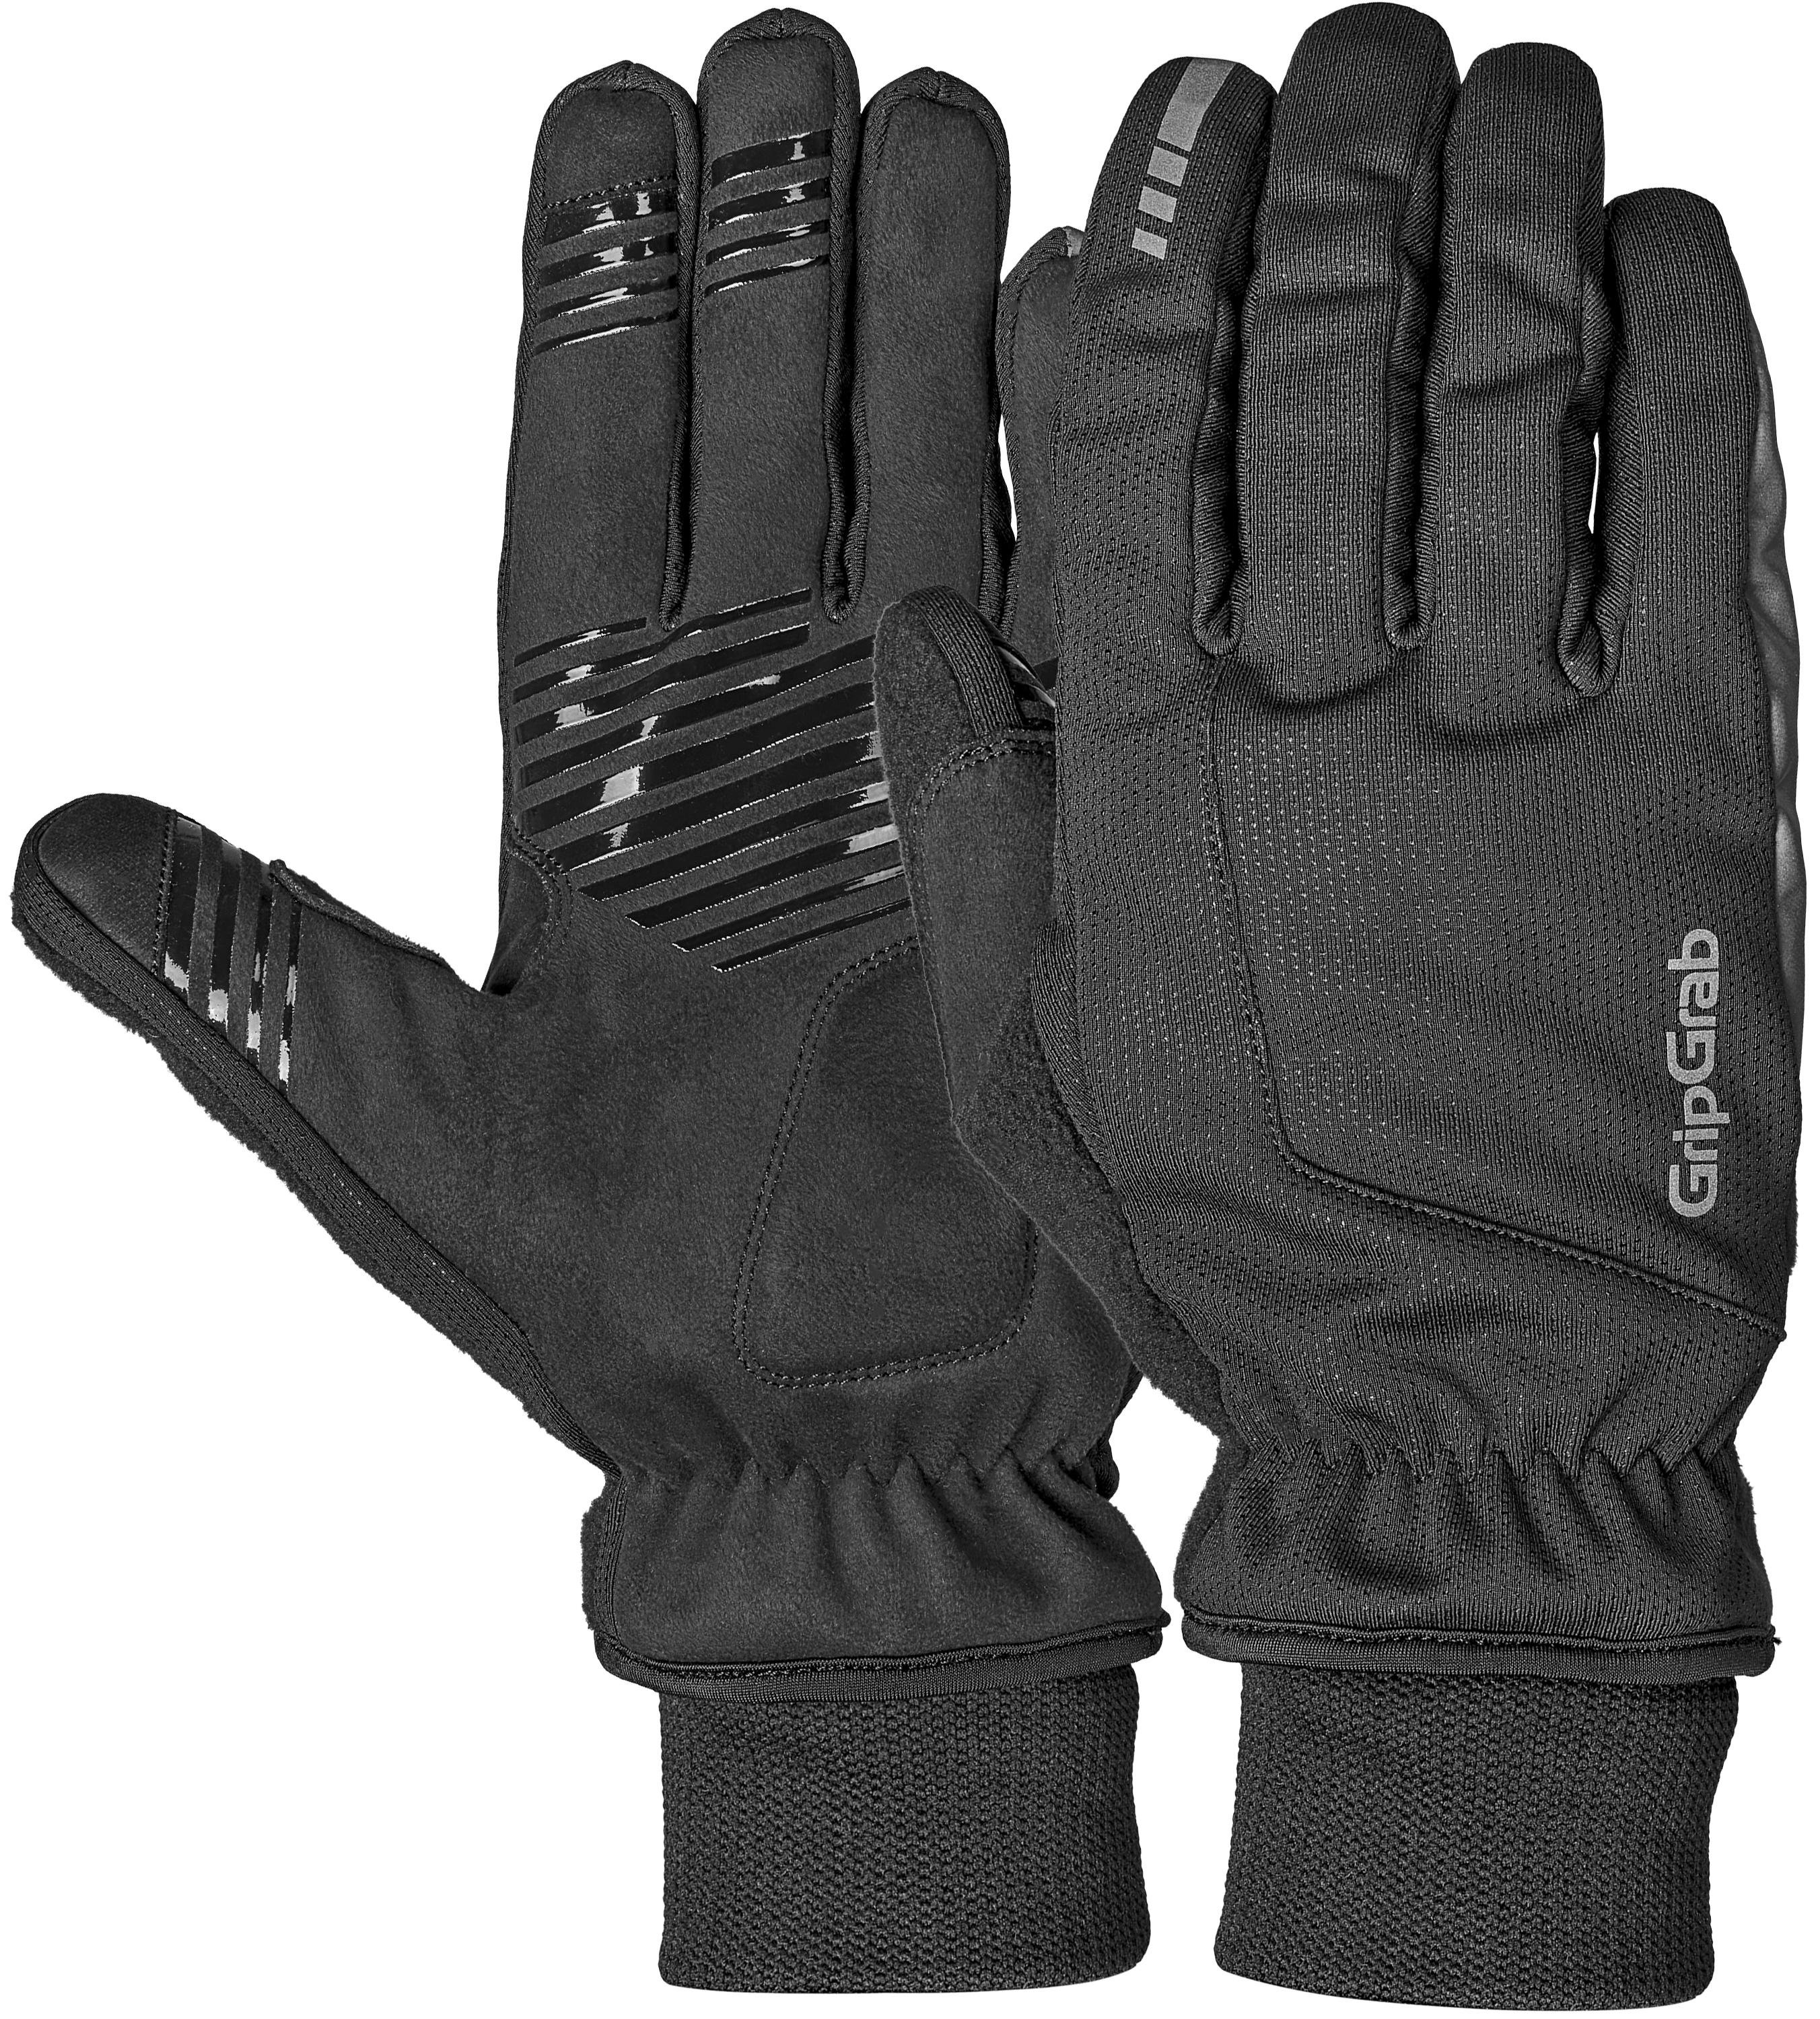 GripGrab Windster 2 Windproof Winter Glove